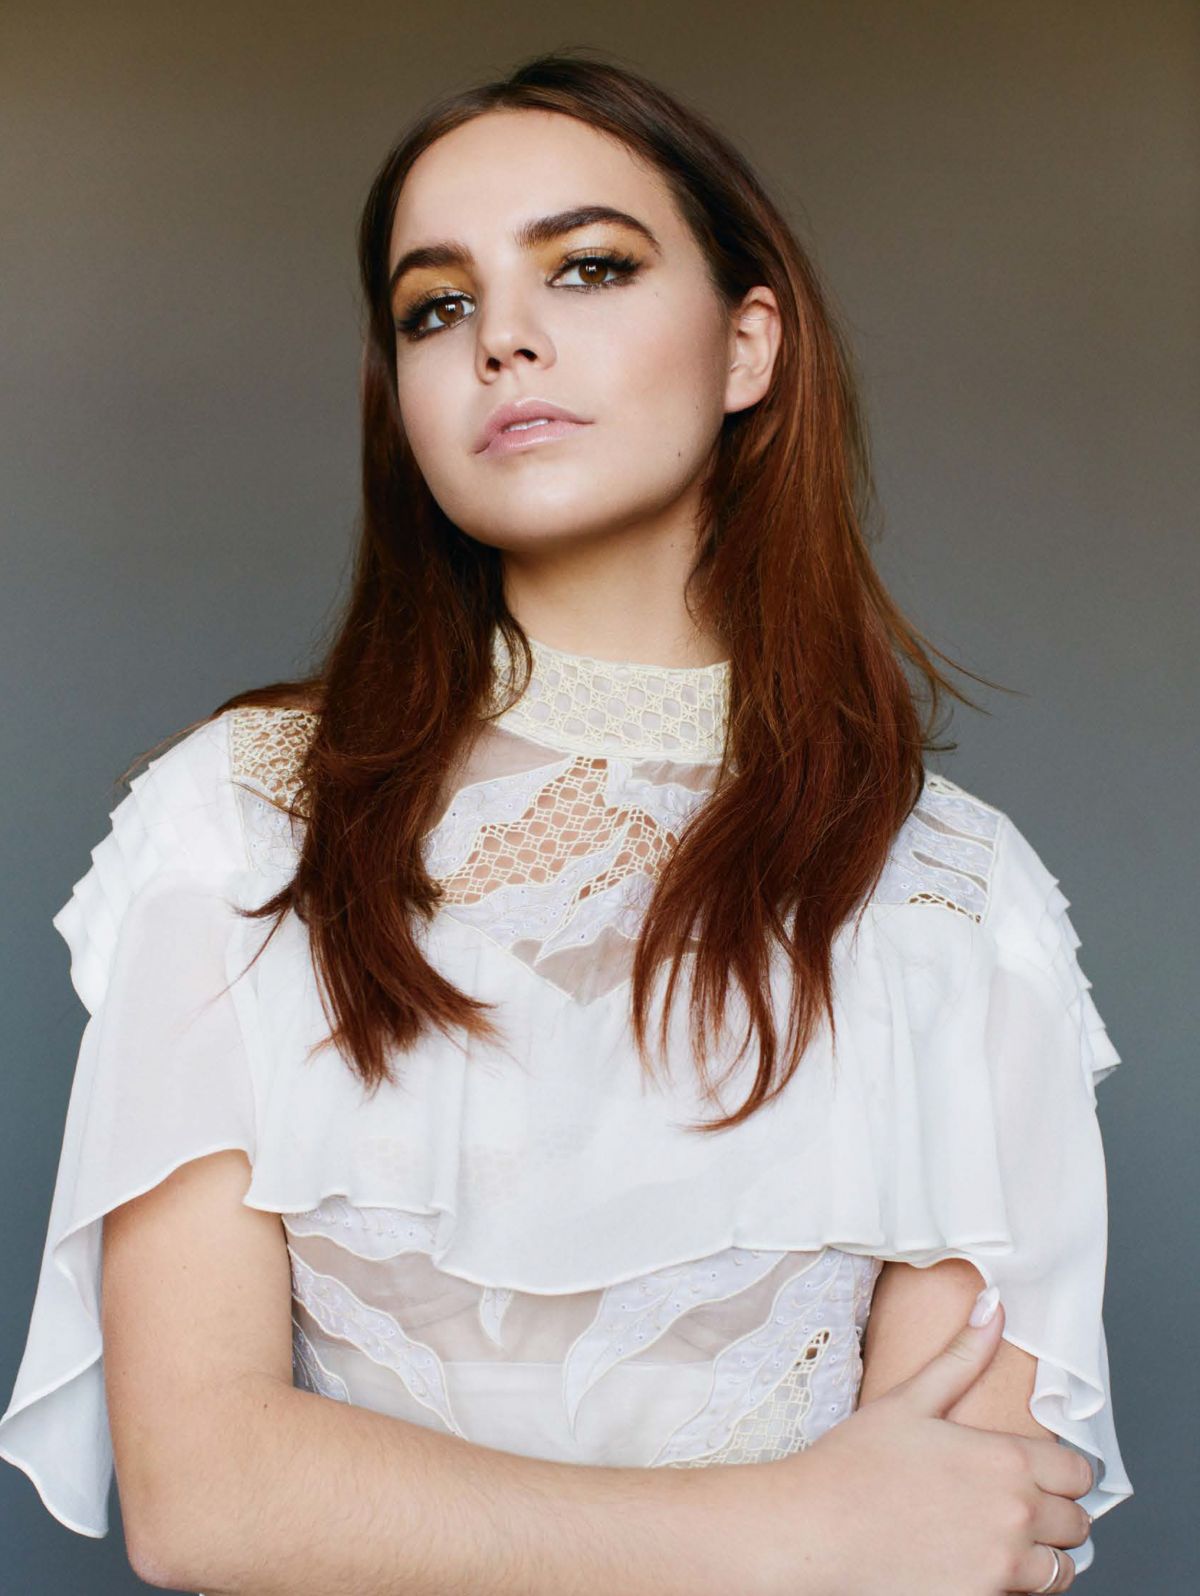 Bailee Madison Image HD Wallpaper And Background